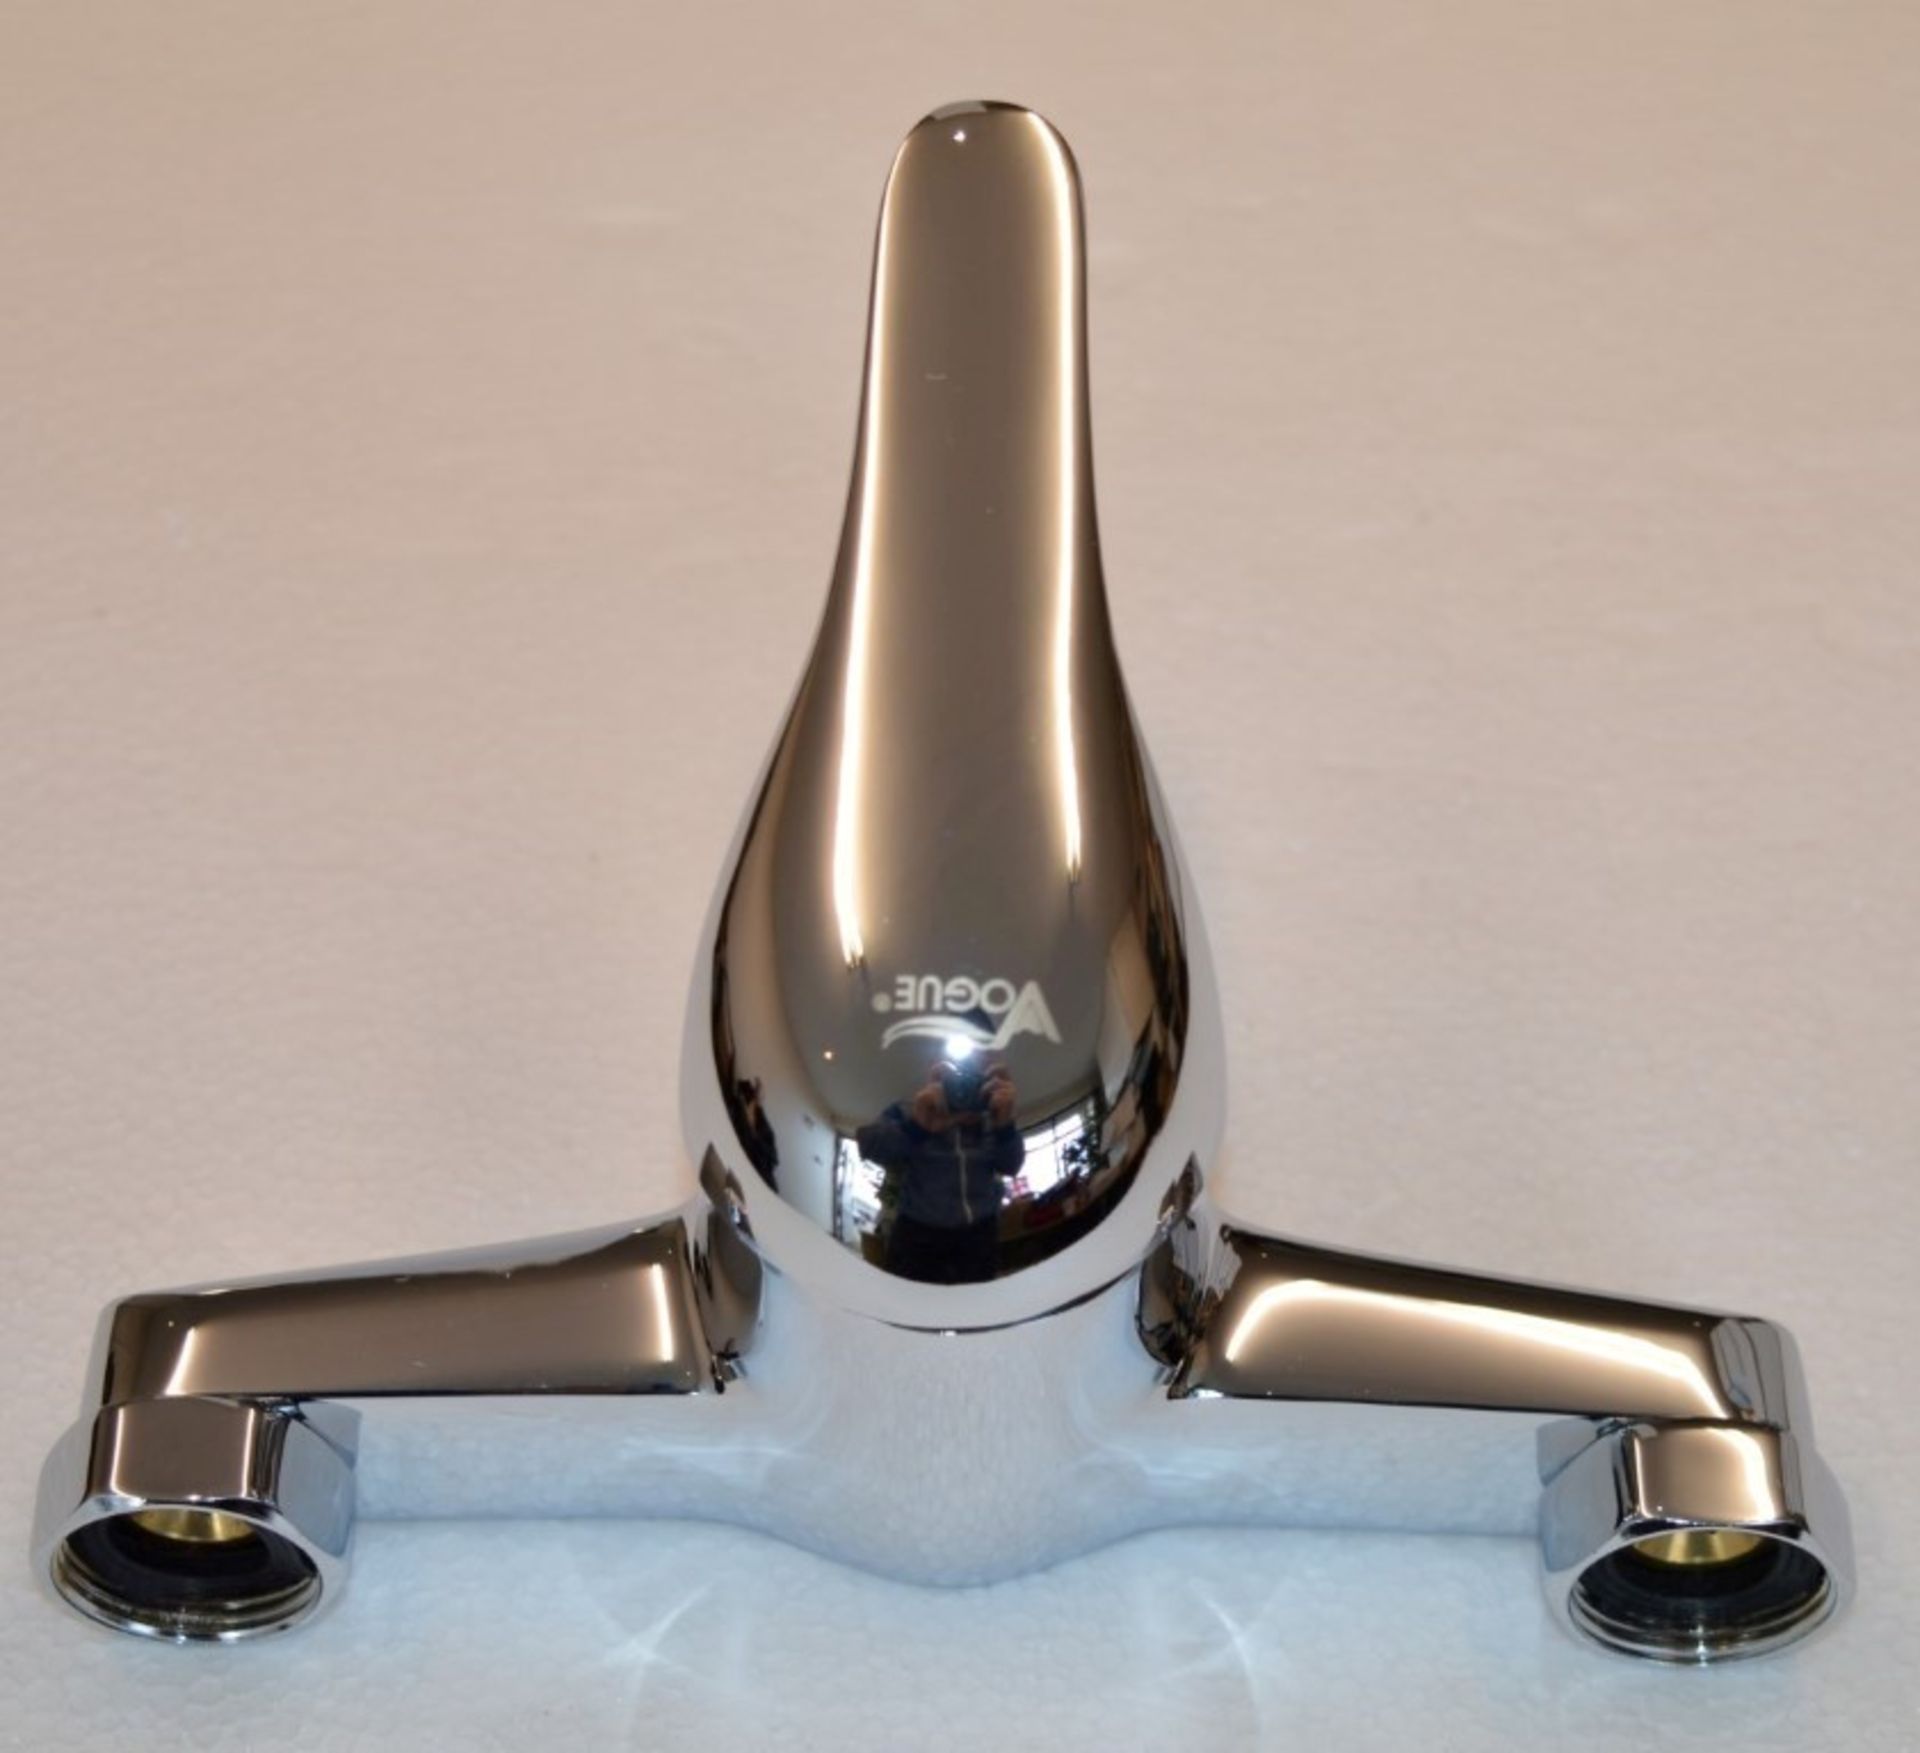 1 x Vogue Carmina Deck Mounted Bath Shower Mixer Tap - Includes Bath Mixer Tap, Shower Head and - Image 3 of 11